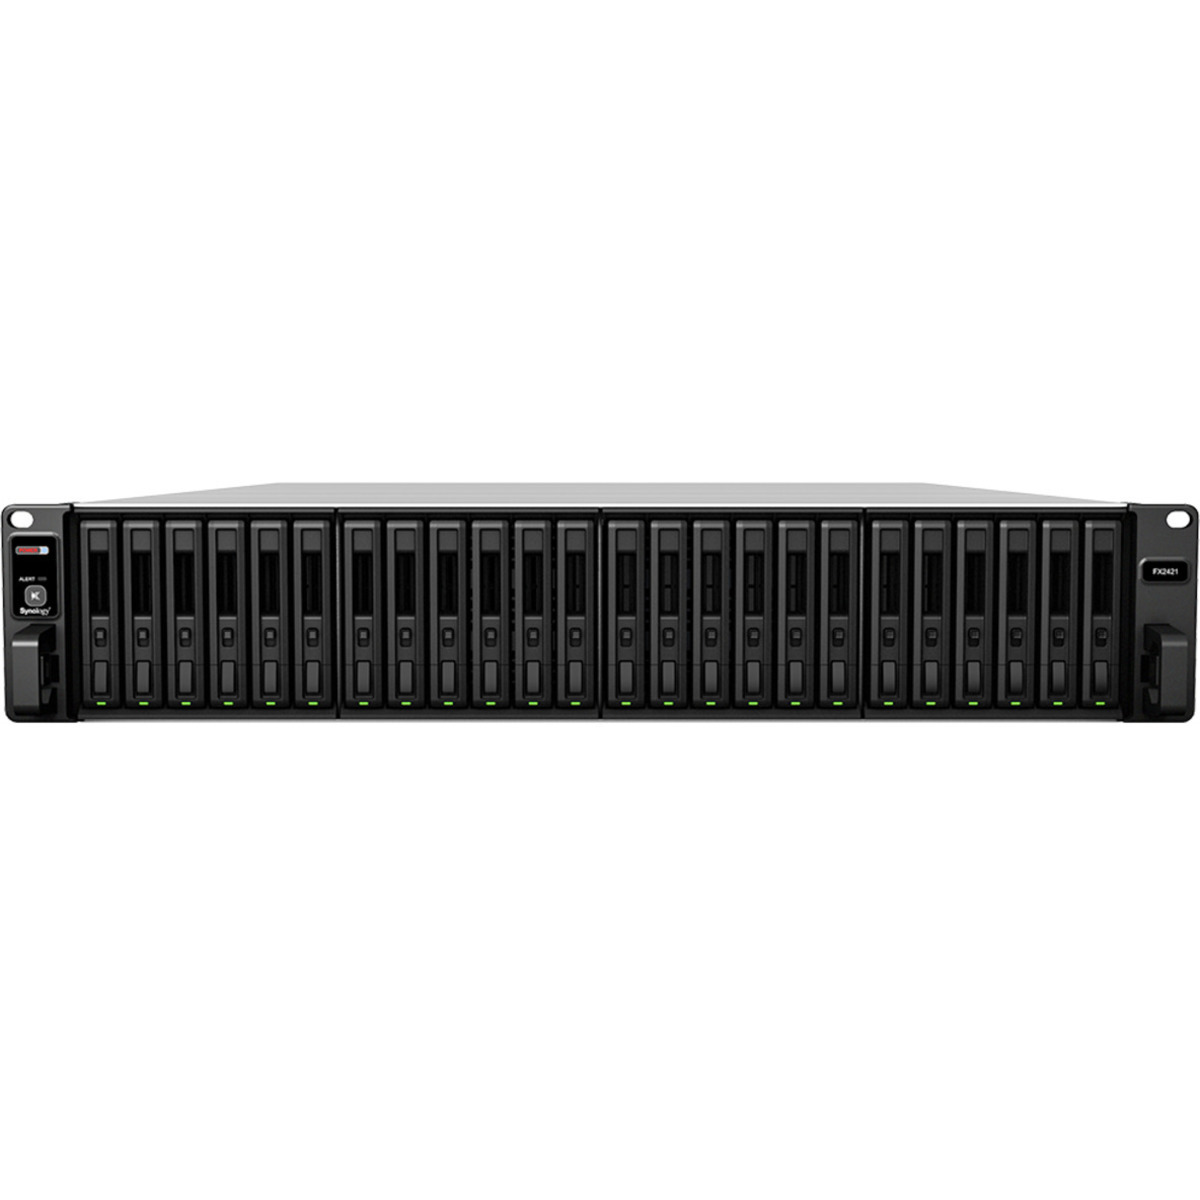 buy $26075 Synology FX2421 192tb RackMount Expansion Enclosure 24x8000gb Samsung 870 QVO MZ-77Q8T0 2.5 SATA 6Gb/s SSD CONSUMER Class Drives Installed - Burn-In Tested - nas headquarters buy network attached storage server device das new raid-5 free shipping usa christmas new year holiday sale FX2421